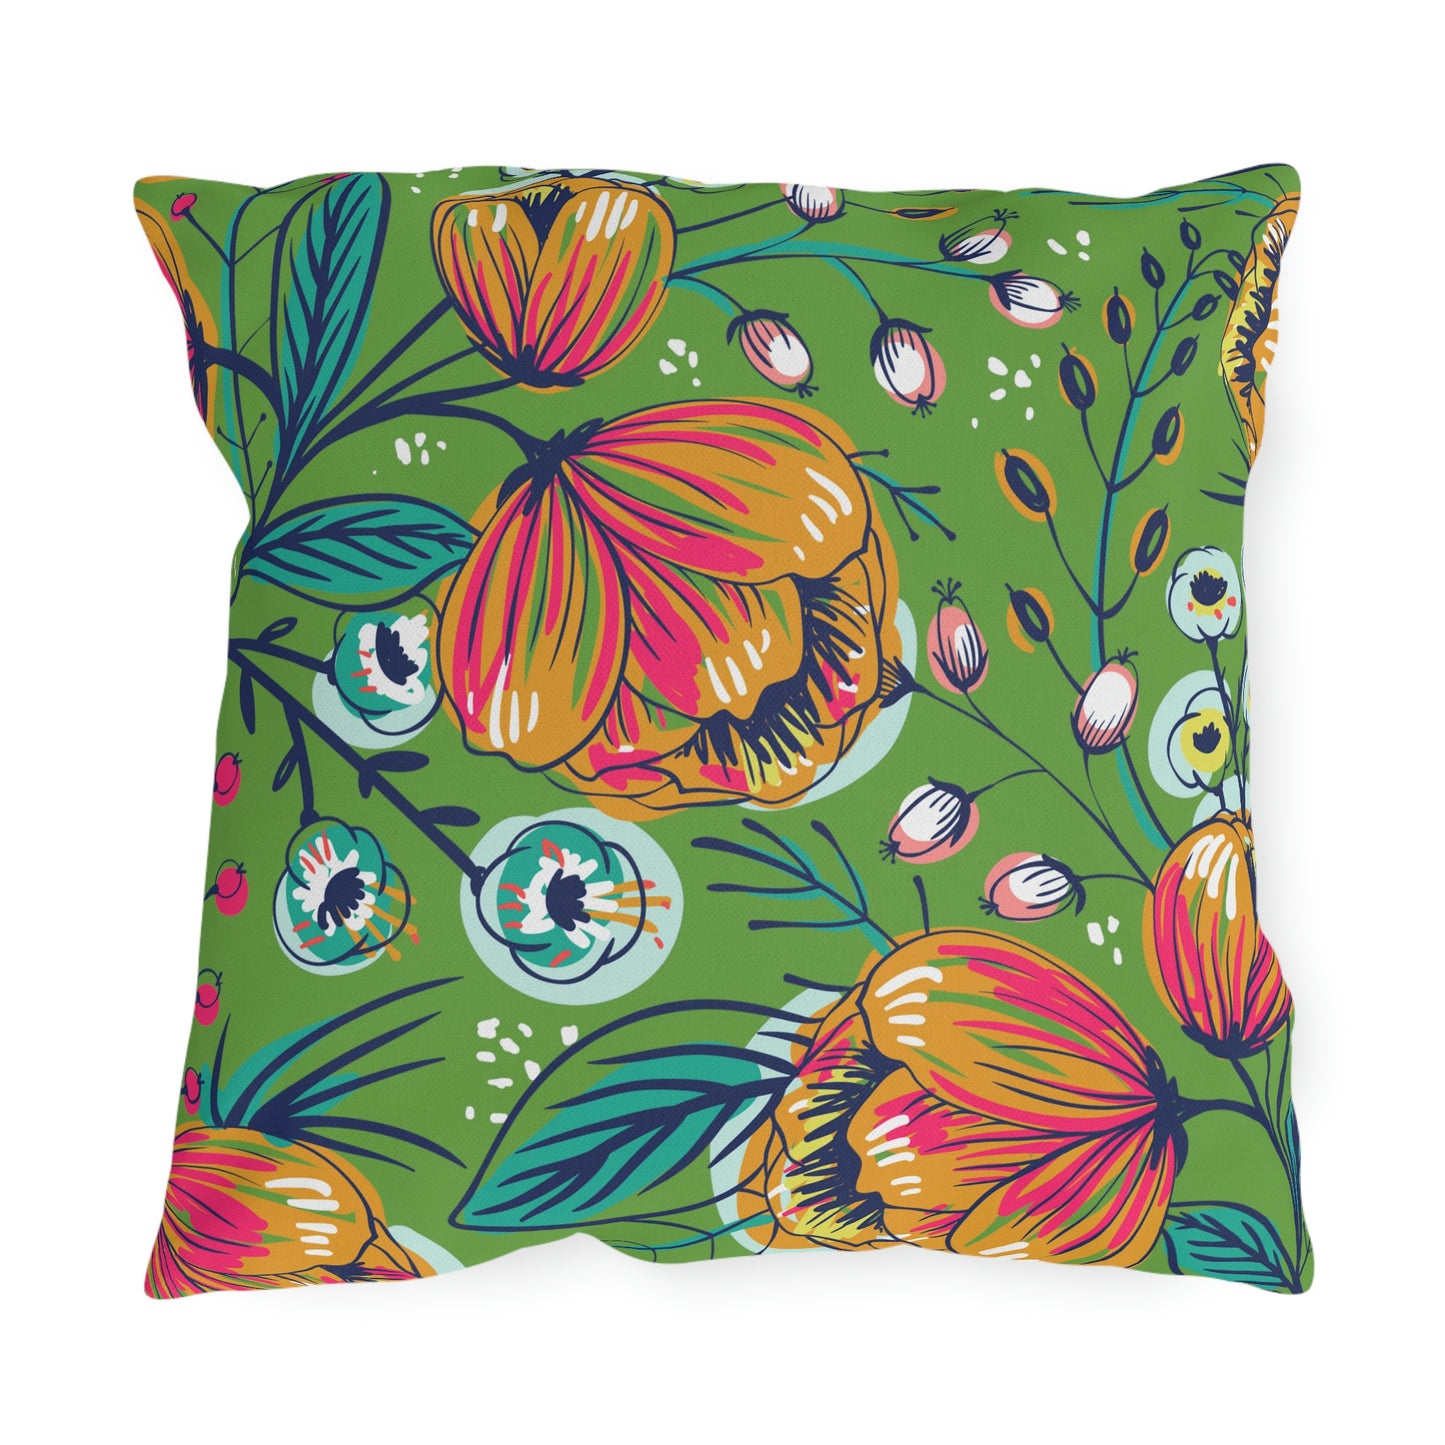 Green, Gold, Orange & Fuchsia Pillow COVER ONLY for Outdoor Living, Firepit Seating, Porch Swings, Keep Pillows Clean, Attractive Decor Accessory